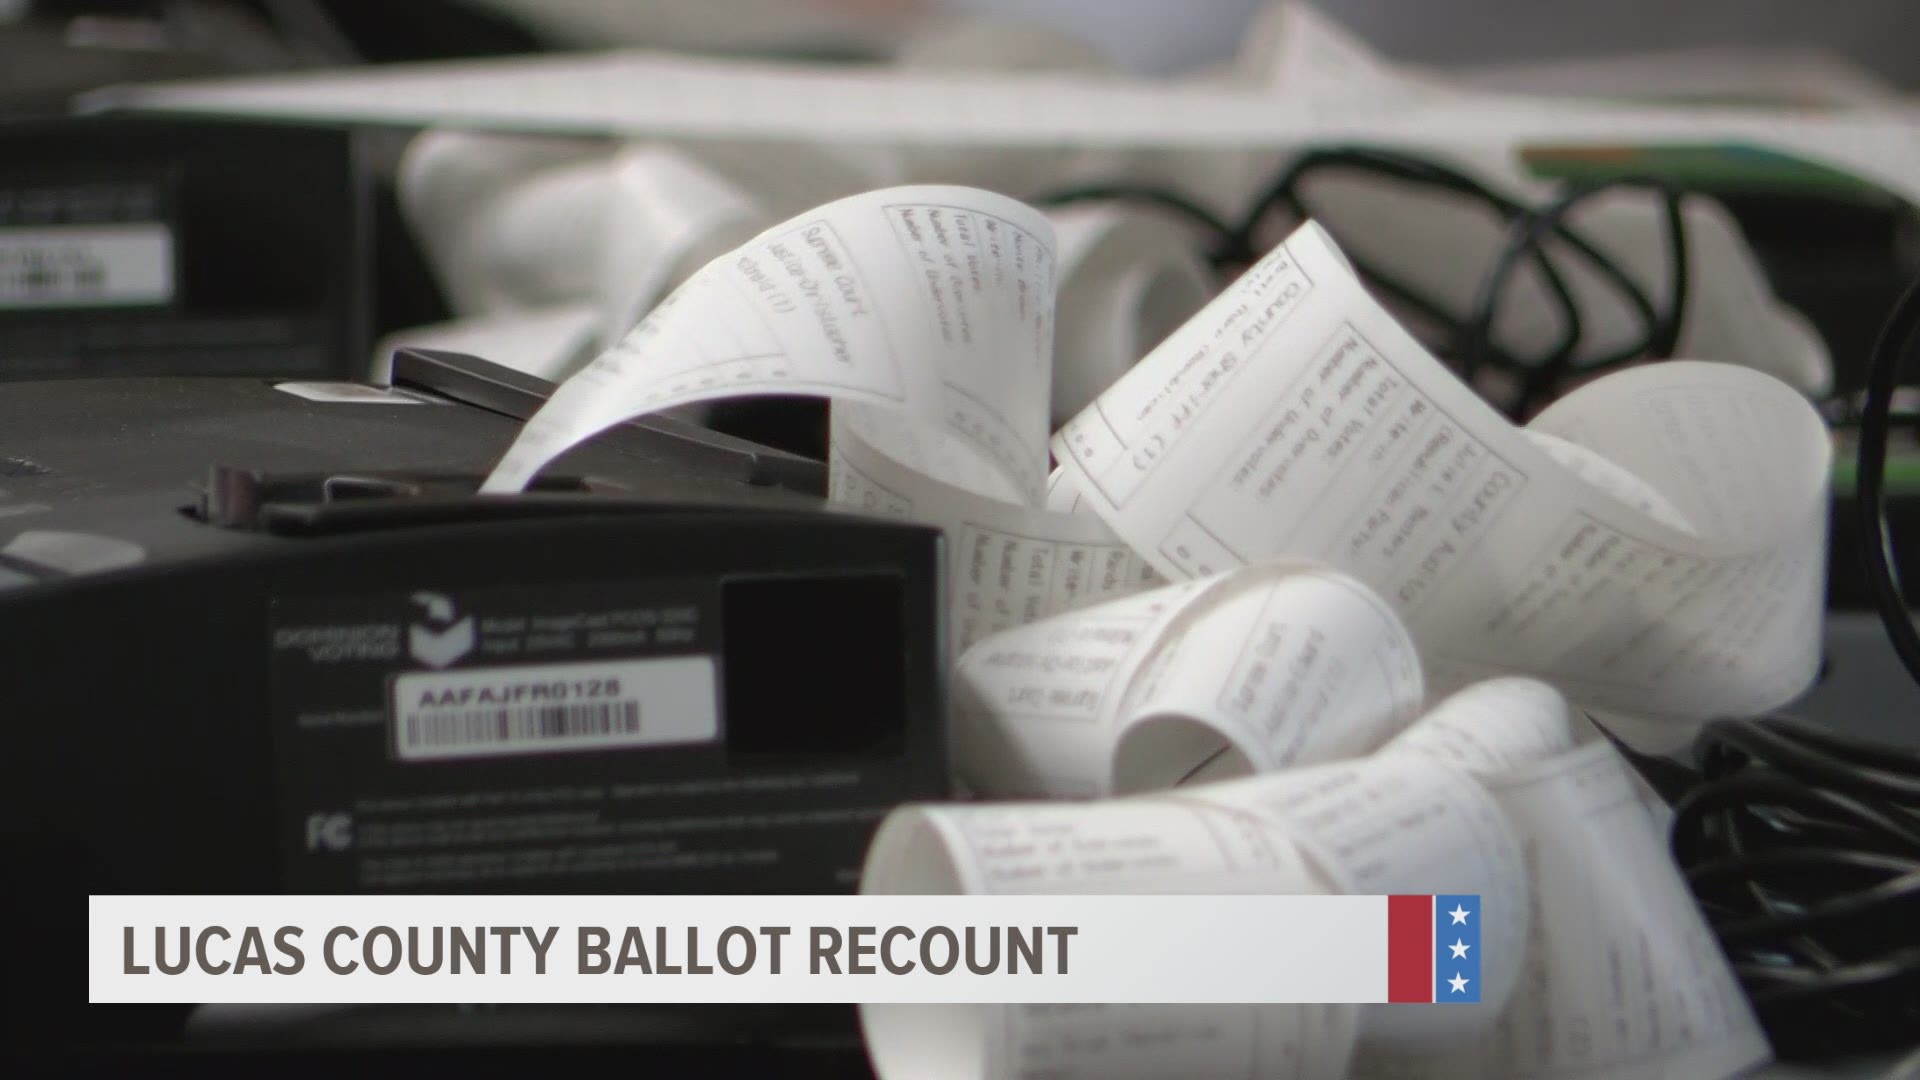 Lucas County joins Jasper County in a county-wide recount and audit after an error was found in election night results.